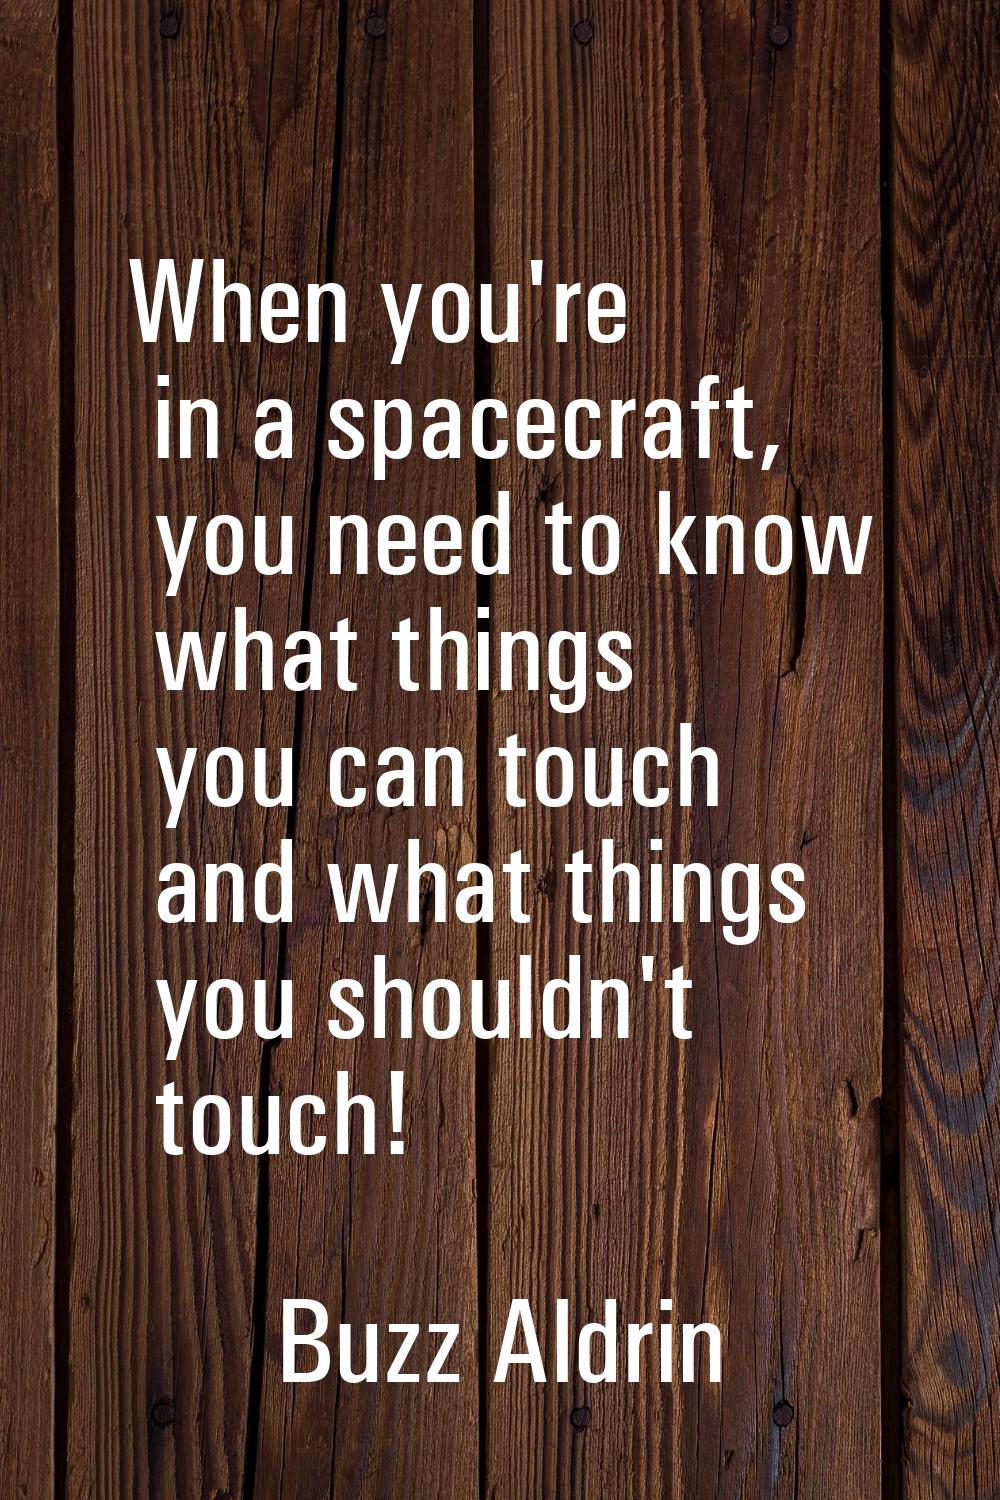 When you're in a spacecraft, you need to know what things you can touch and what things you shouldn